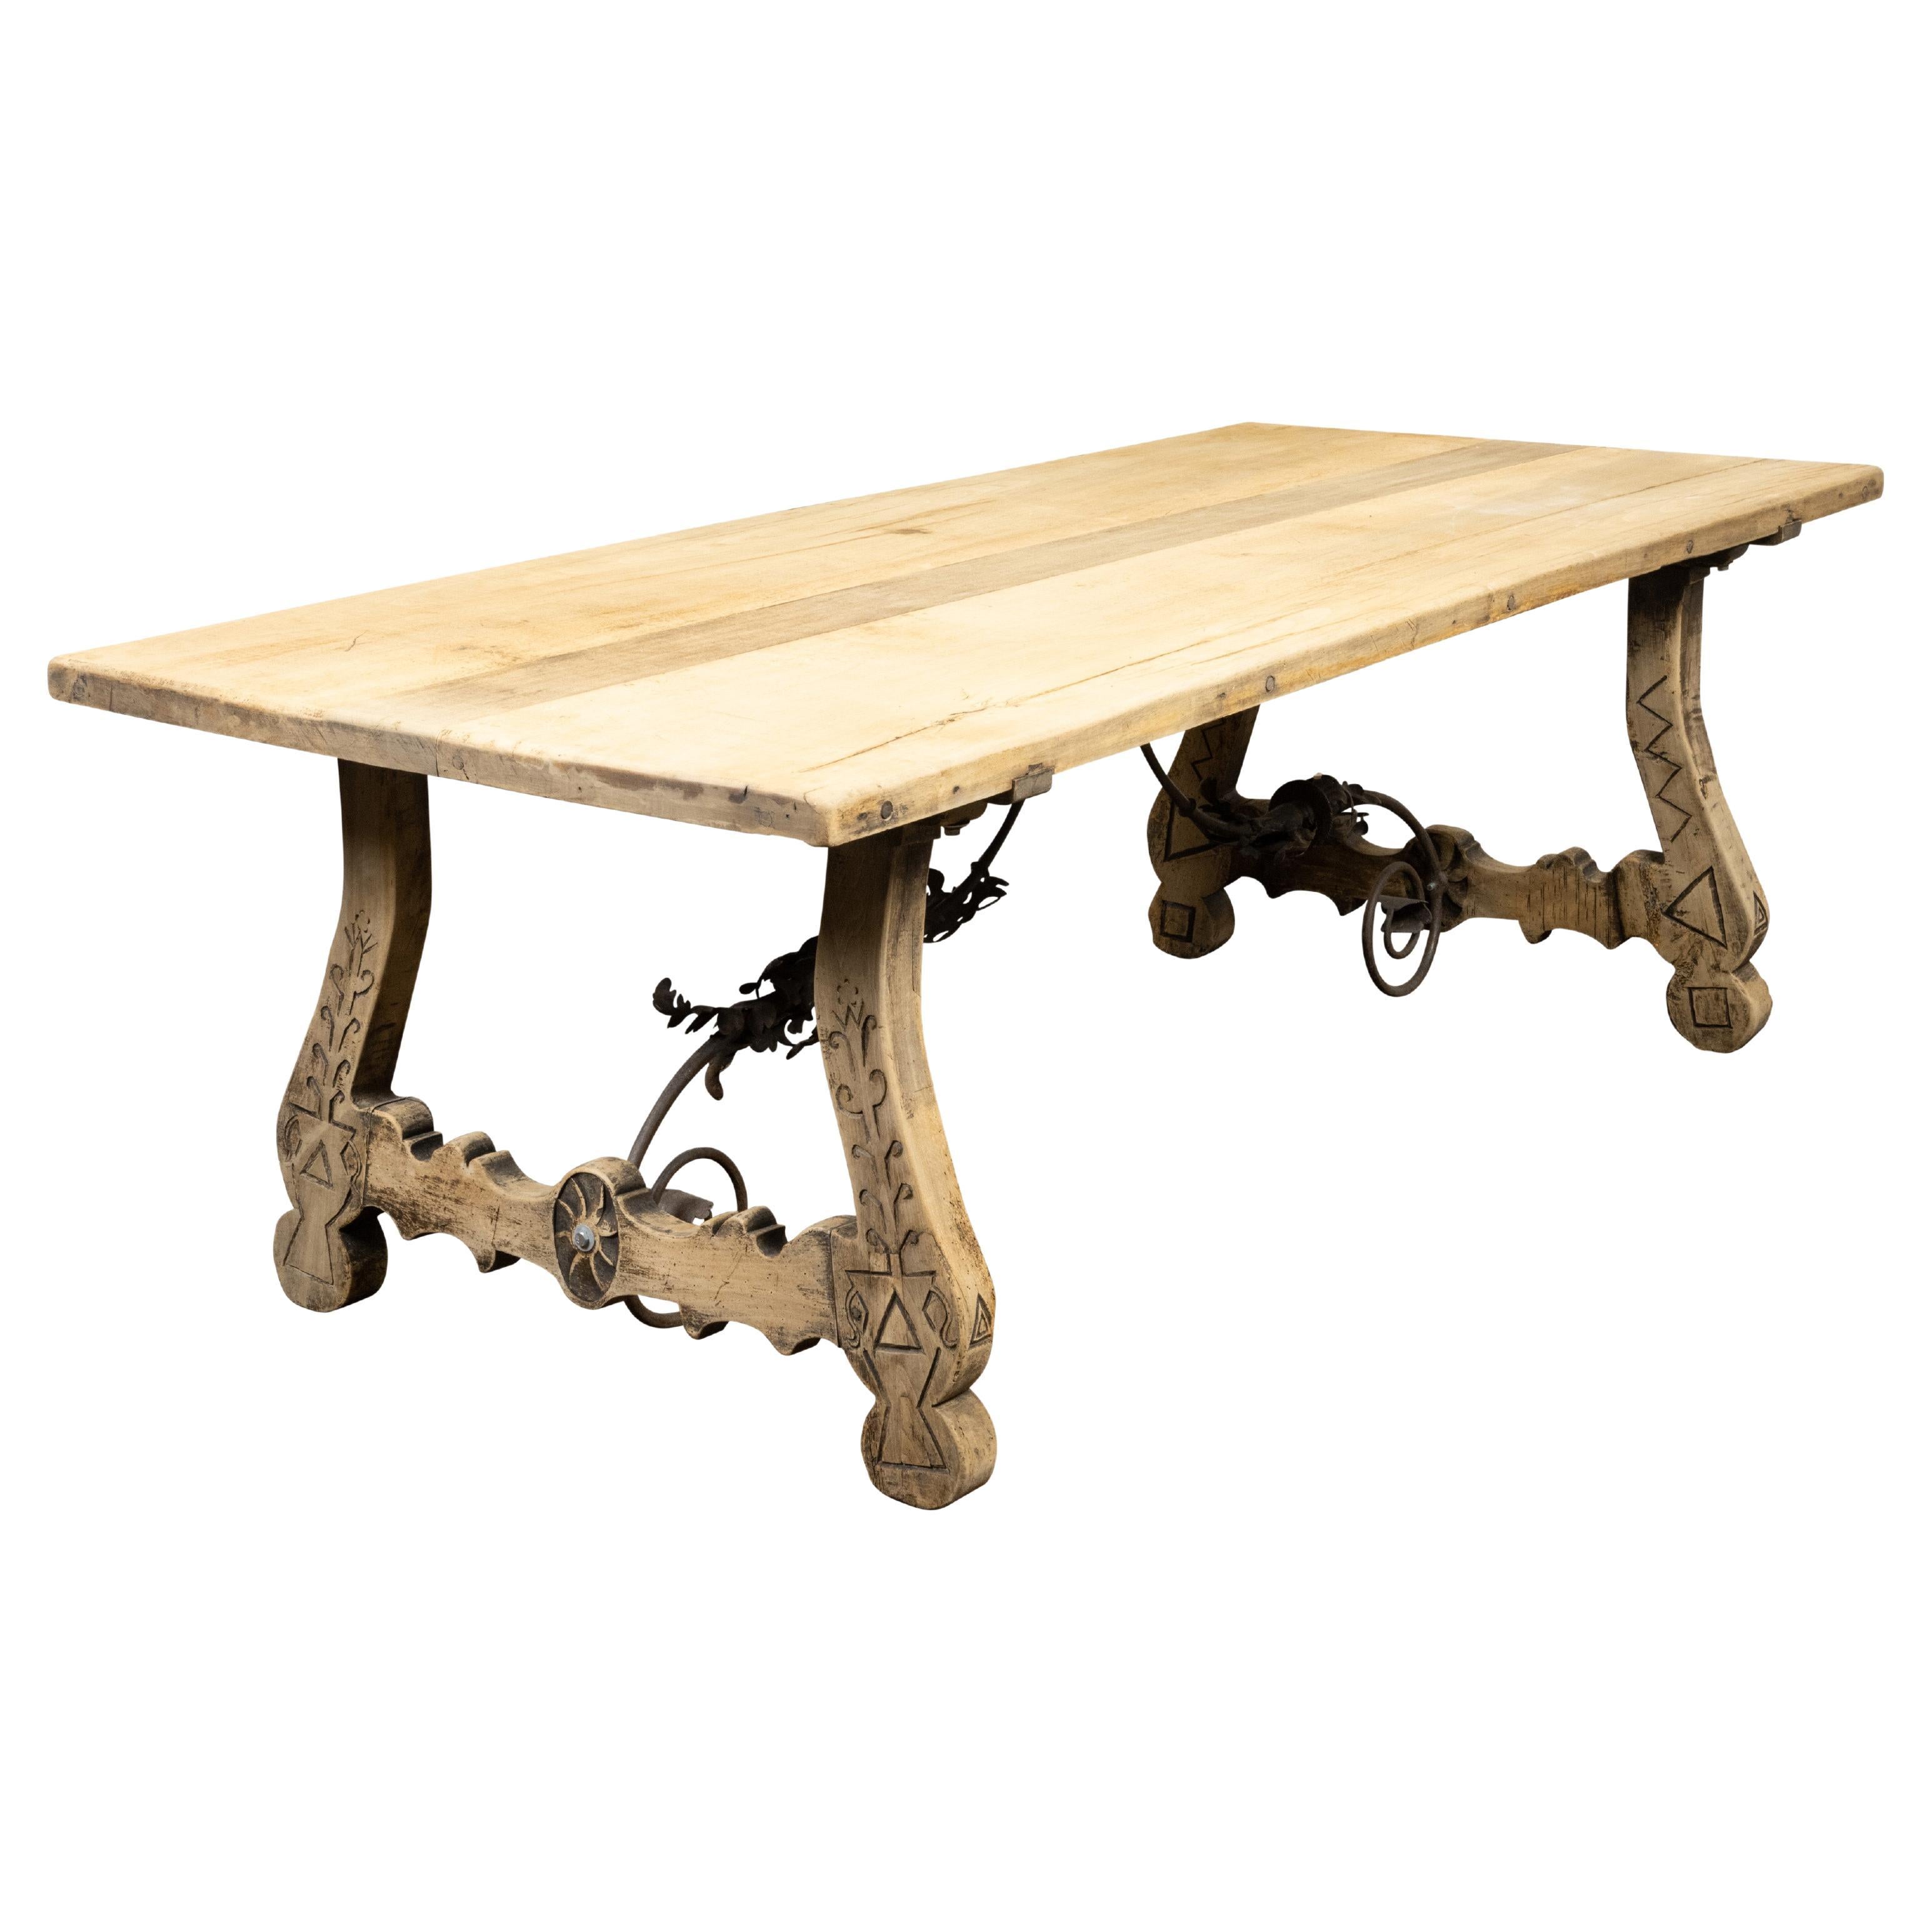 Italian 19th Century Bleached Oak Farm Table with Baroque Style Carved Base